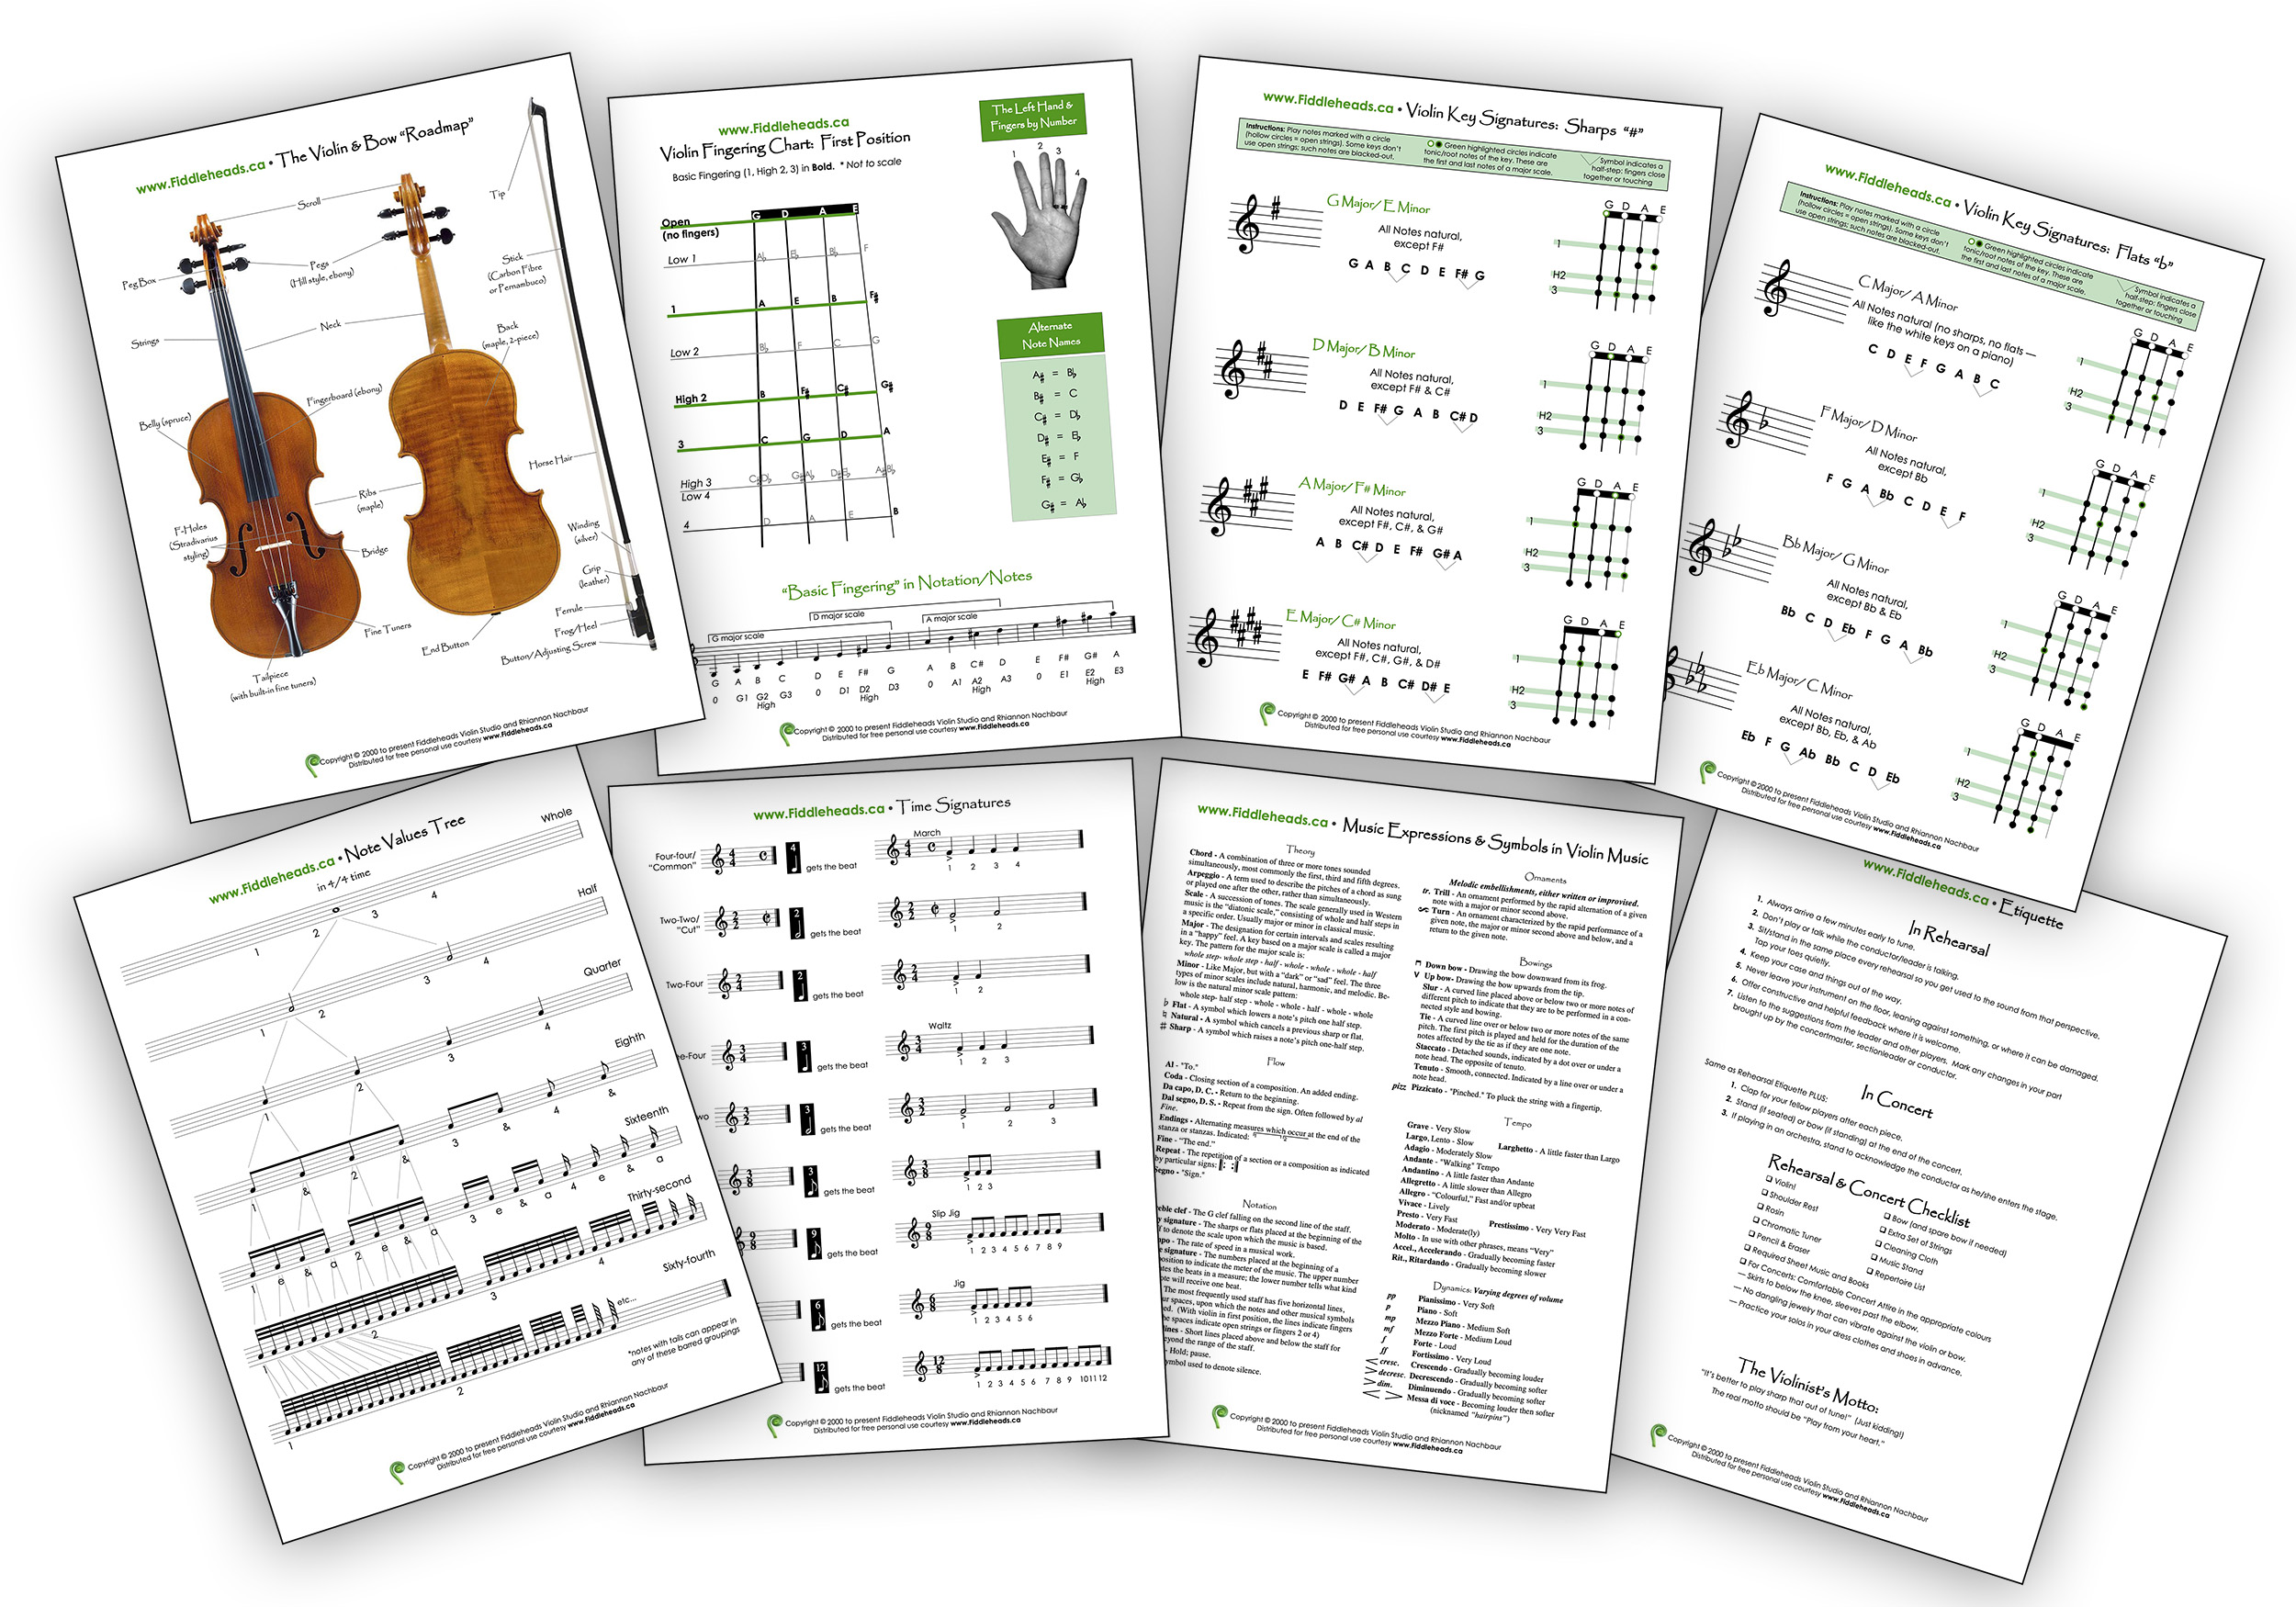 Violin charts fanned out